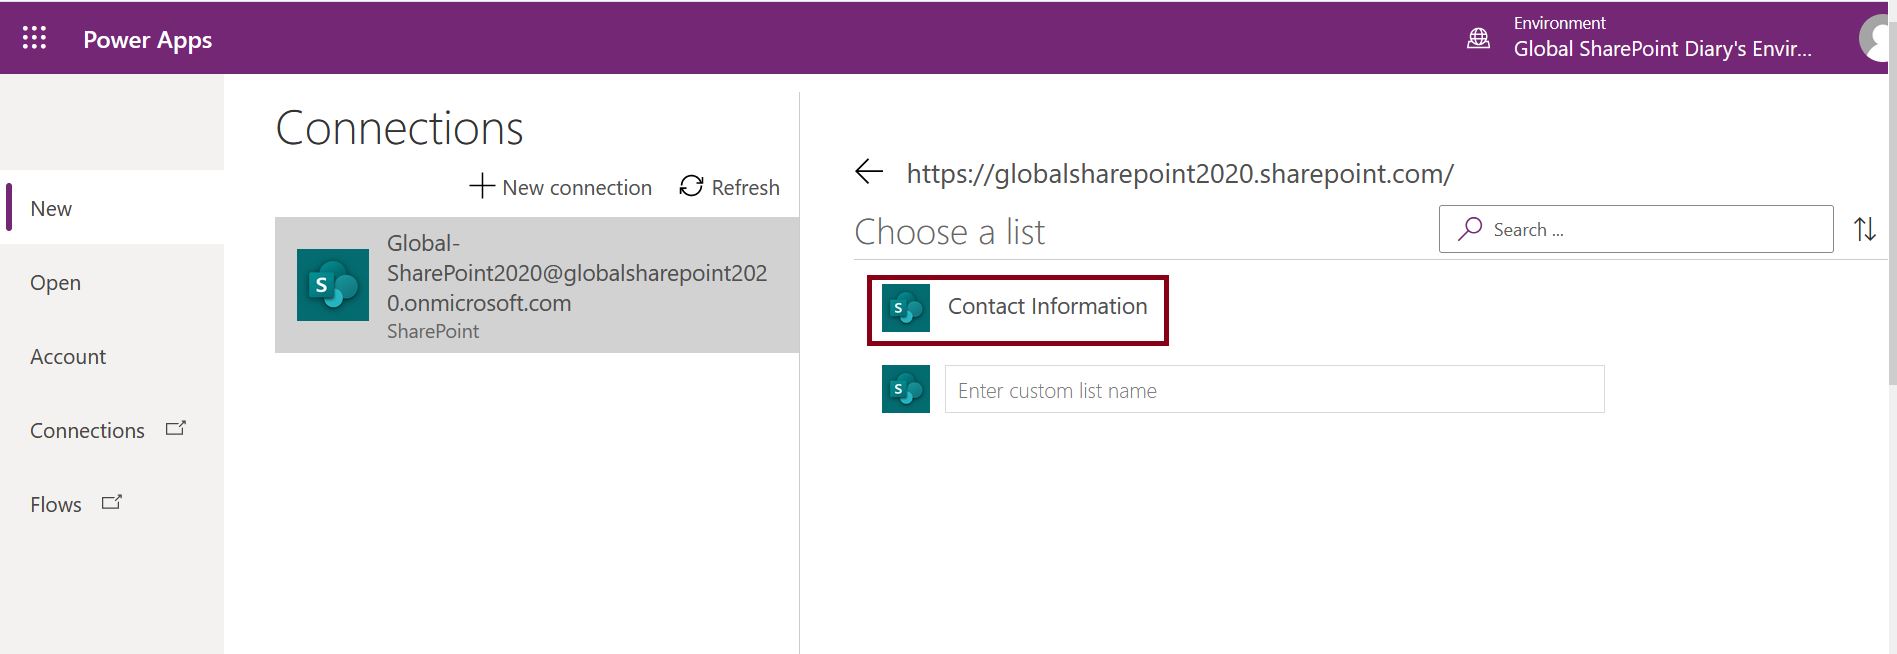 Choose a list from SharePoint Connection in Power Apps model-driven app